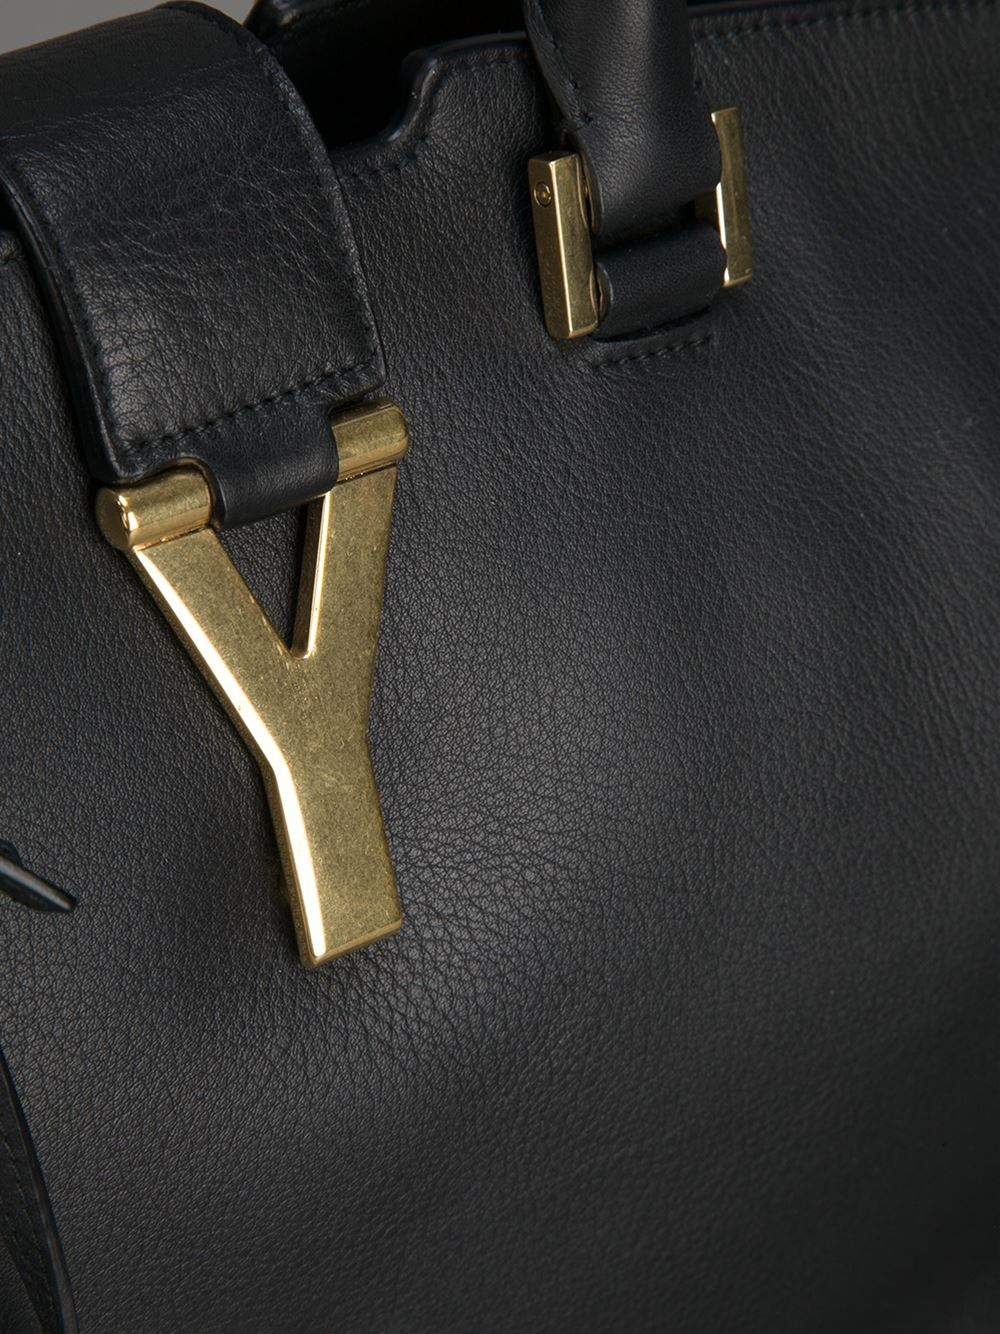 Saint laurent Small 'cabas Y' Tote in Black | Lyst